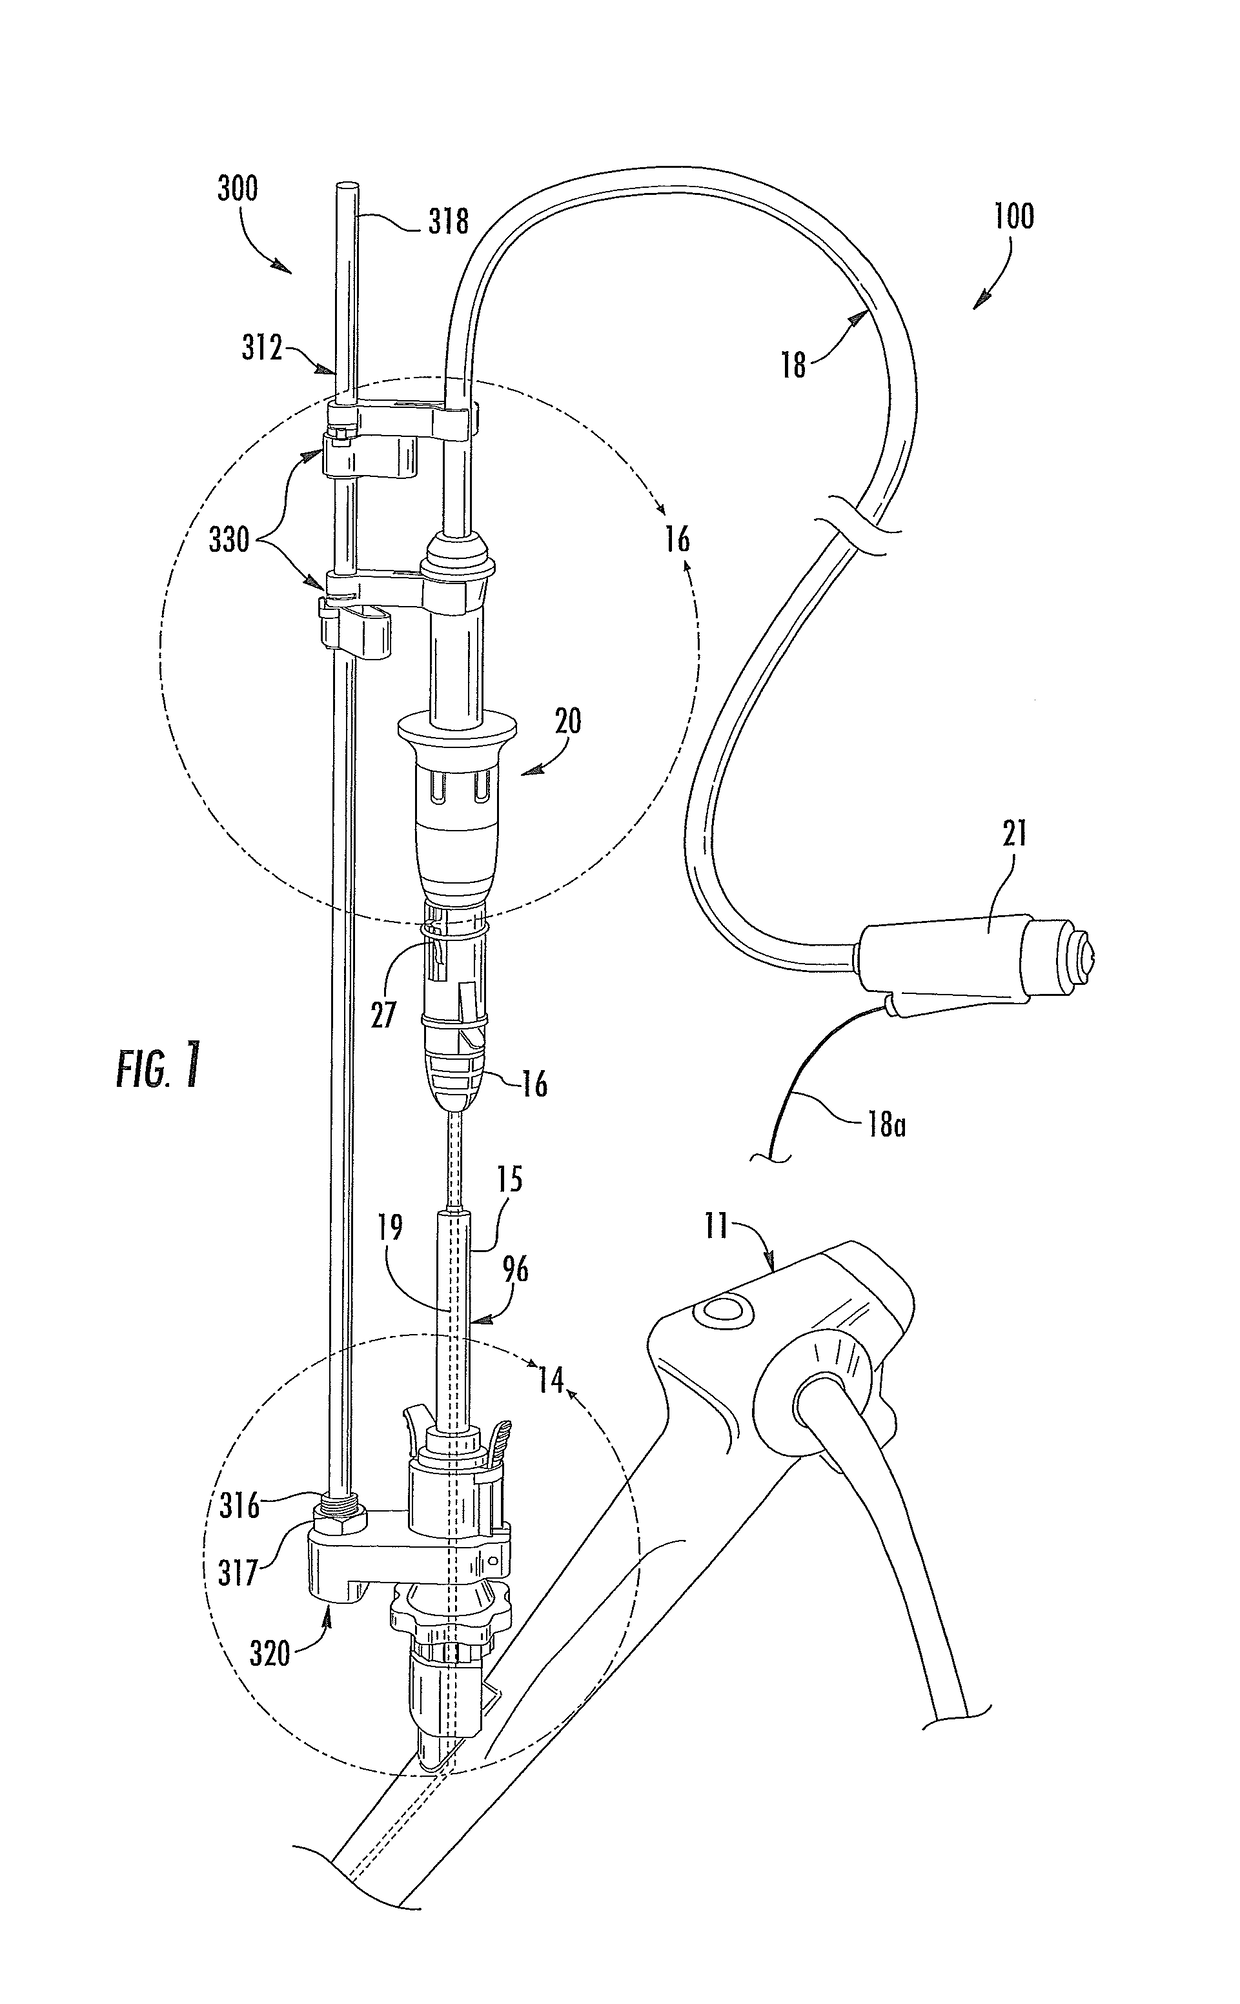 Microwave ablation catheter, handle, and system